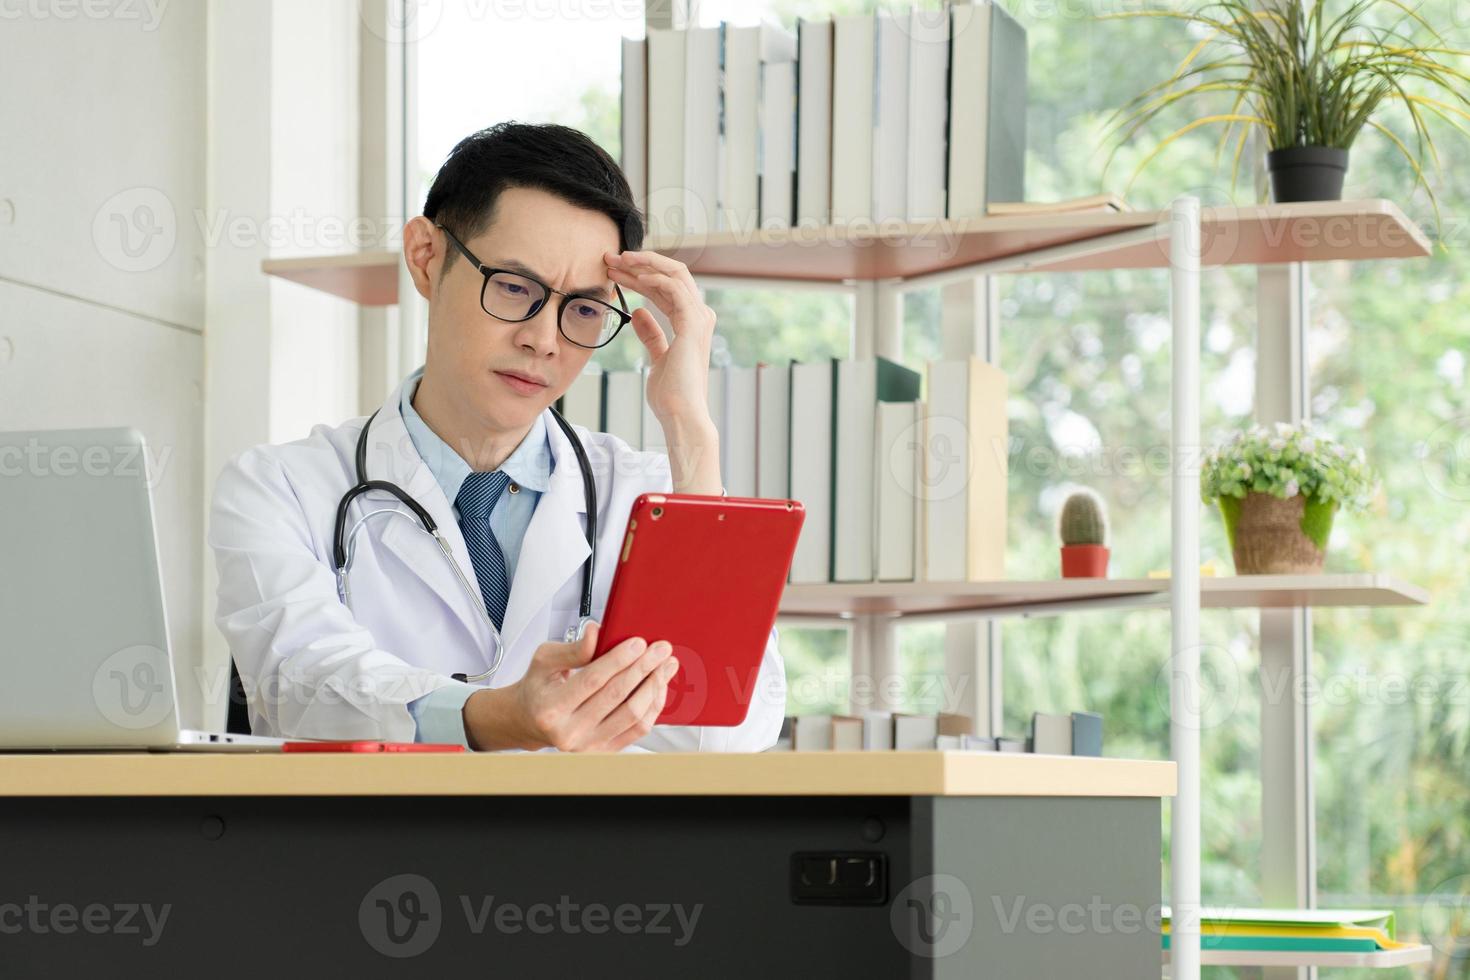 Doctor Reading Patient Record From Digital Tablet in Hospital Office photo